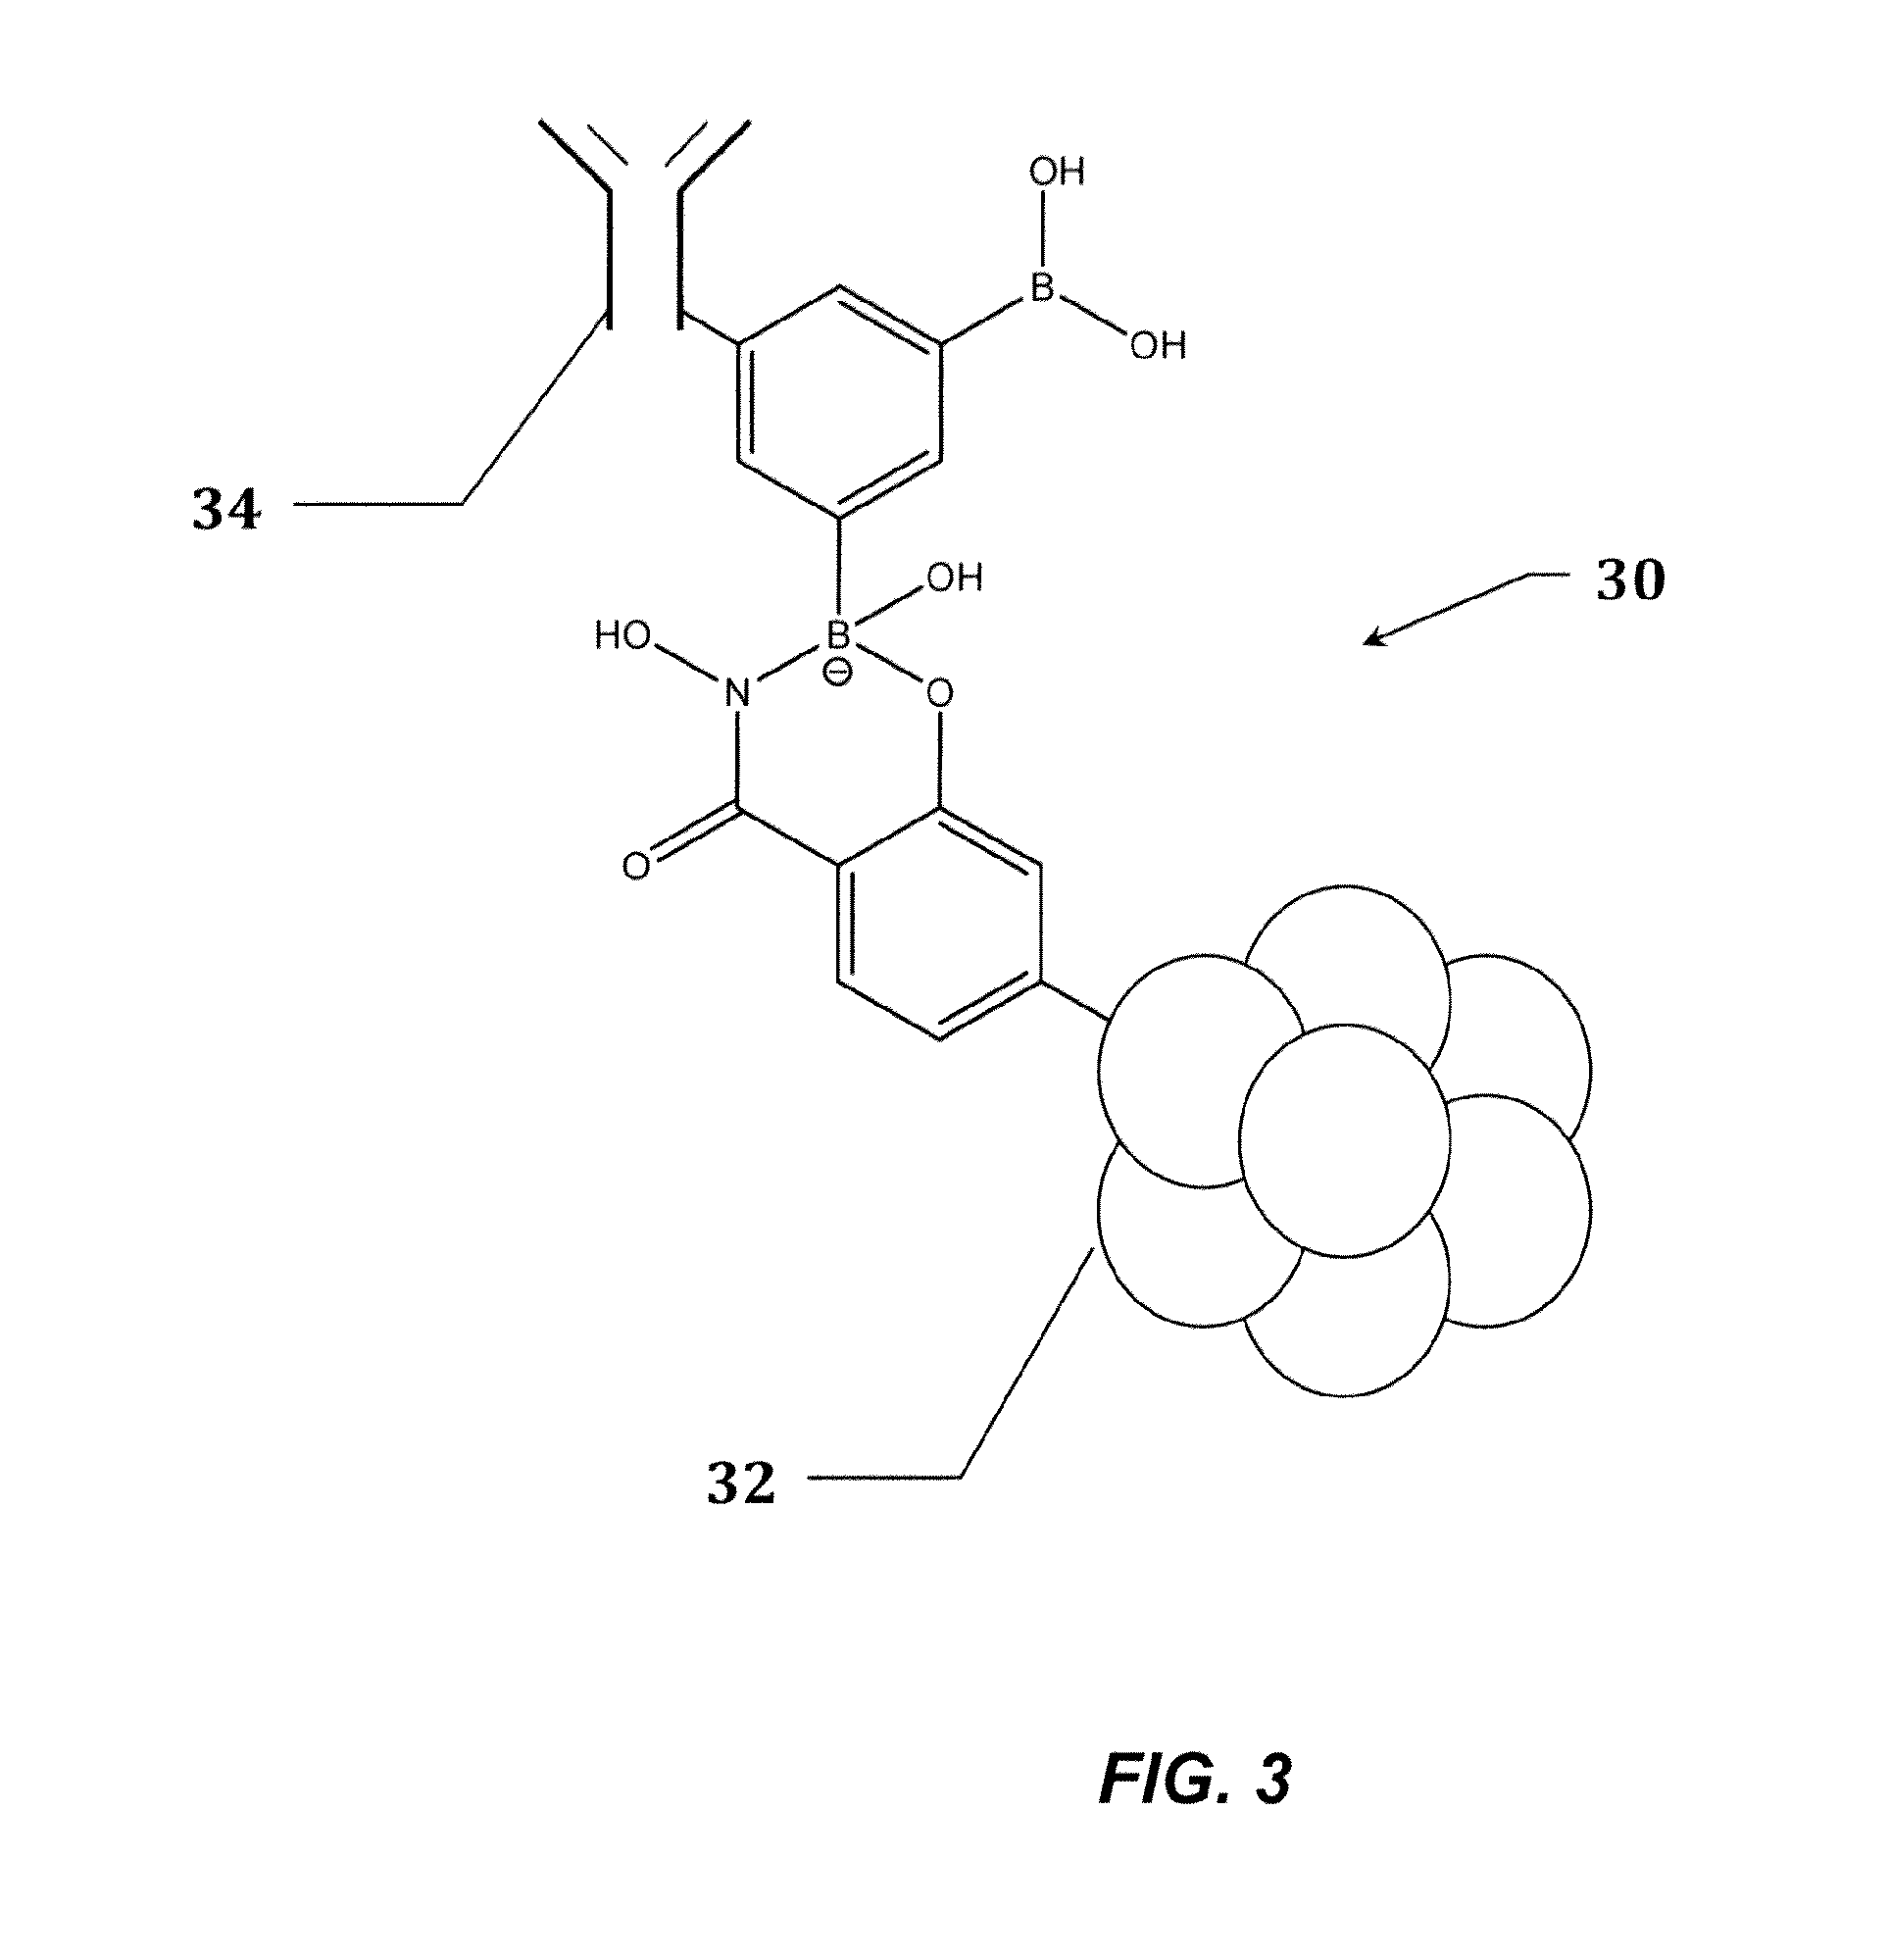 Paxillin as a therapeutic or diagnostic marker for cancer